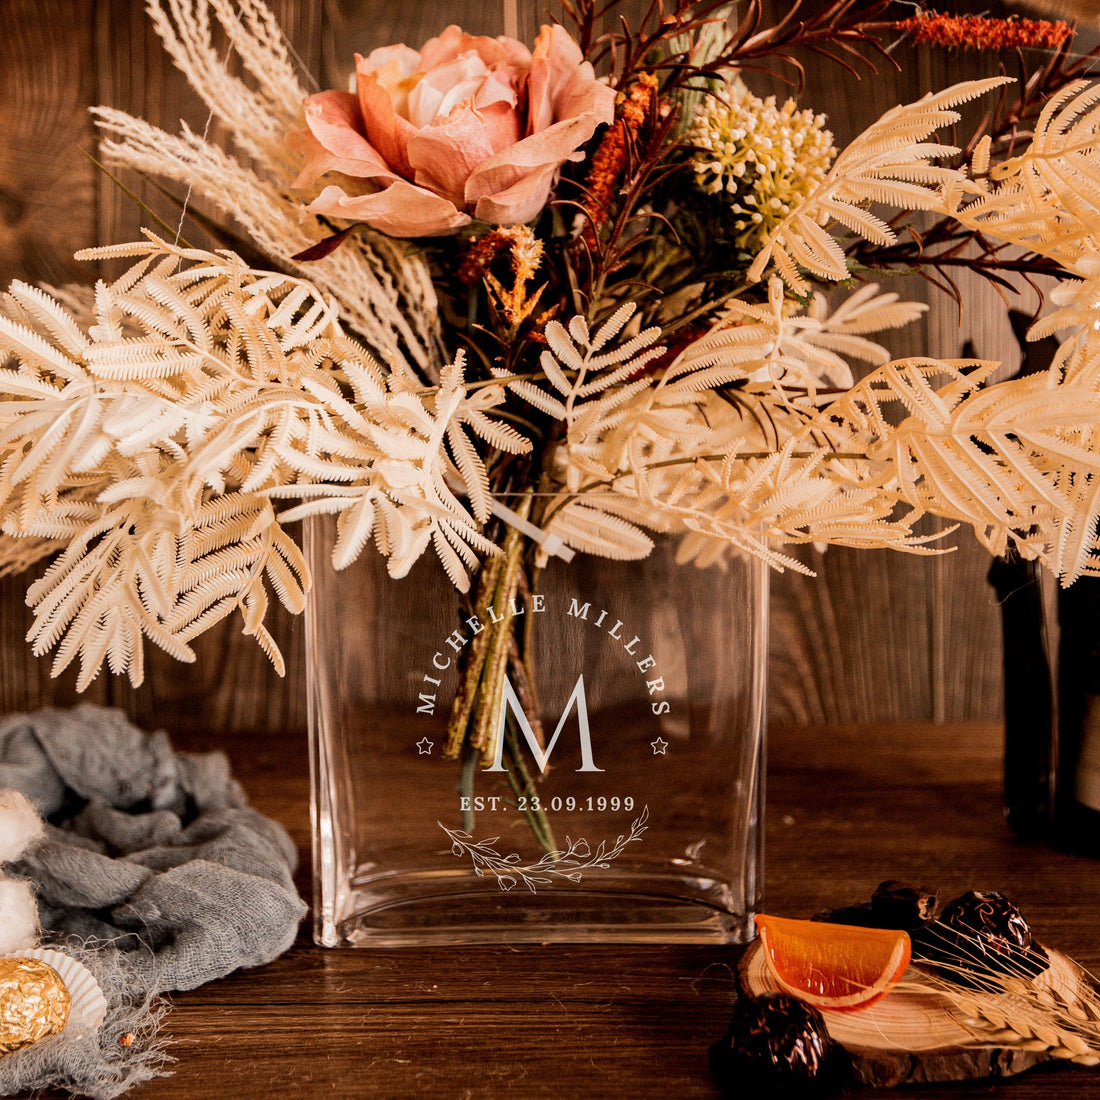 Personalised Large Rectangle Clear Glass Vase, Custom Engraved Memorial Wedding Gift for Bridesmaid, Mother of Bride/ Groom, Housewarming, Anniversary